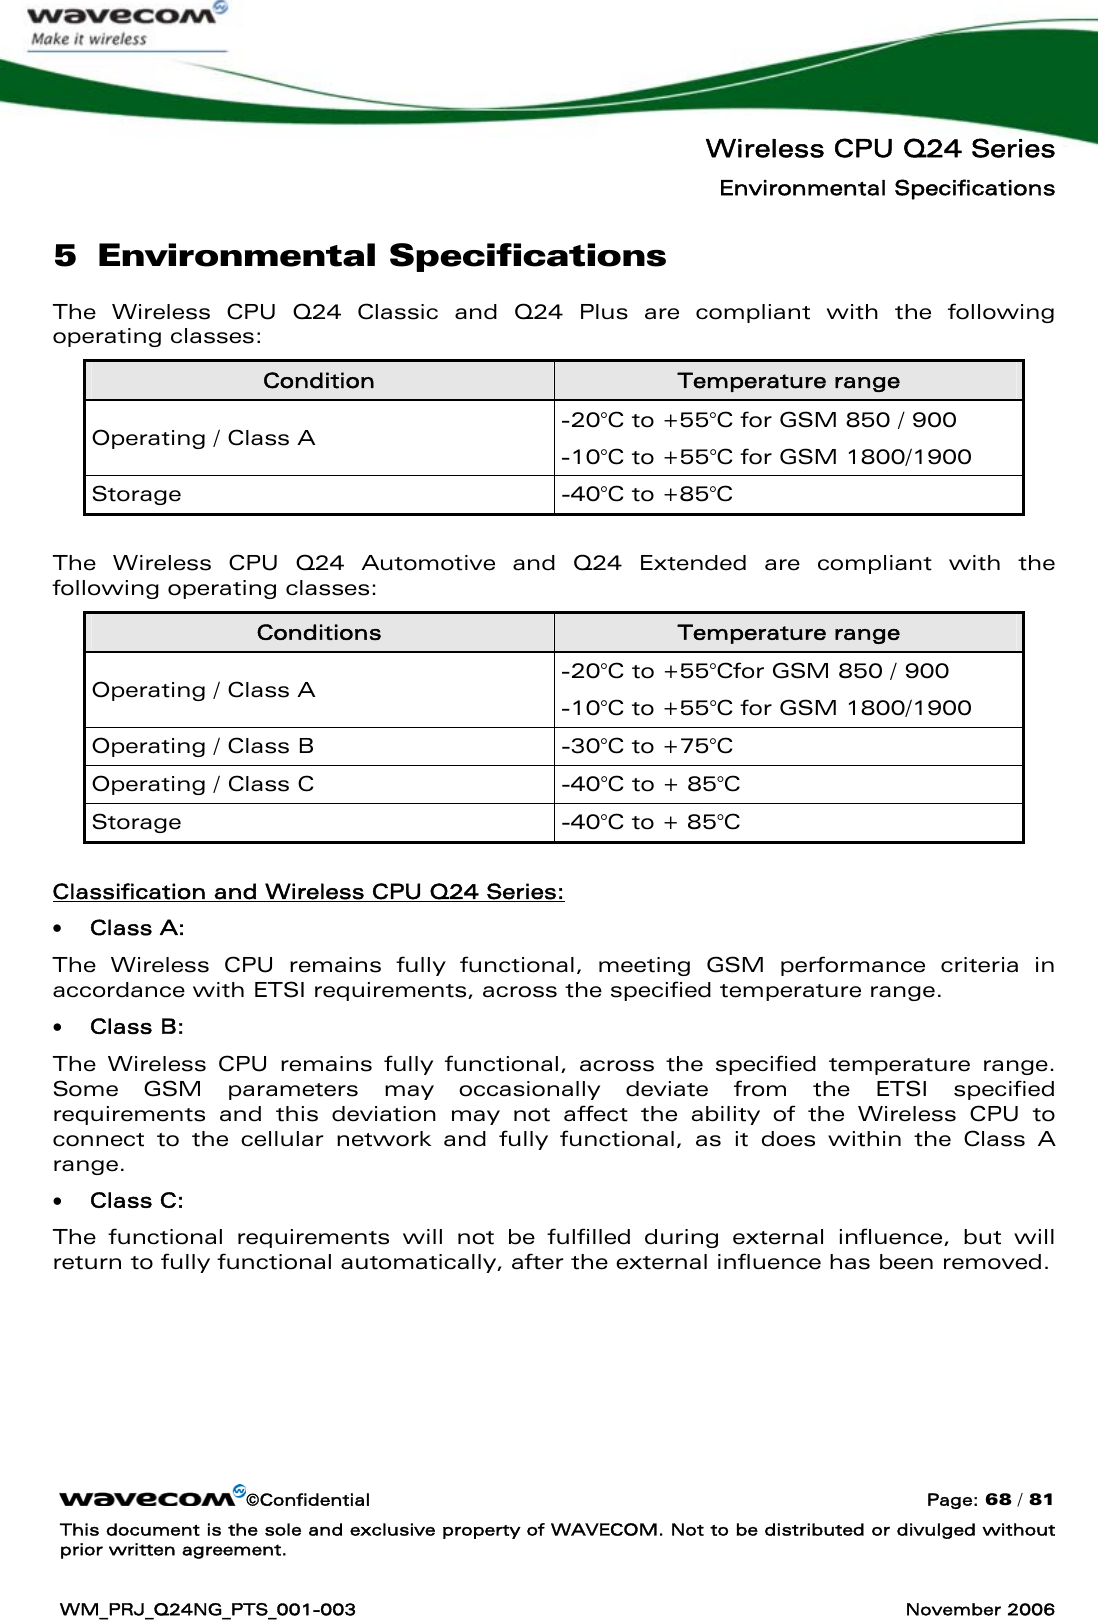   Wireless CPU Q24 Series Environmental Specifications ©Confidential  Page: 68 / 81 This document is the sole and exclusive property of WAVECOM. Not to be distributed or divulged without prior written agreement.  WM_PRJ_Q24NG_PTS_001-003  November 2006  5 Environmental Specifications The Wireless CPU Q24 Classic and Q24 Plus are compliant with the following operating classes: Condition  Temperature range Operating / Class A  -20°C to +55°C for GSM 850 / 900 -10°C to +55°C for GSM 1800/1900 Storage  -40°C to +85°C  The Wireless CPU Q24 Automotive and Q24 Extended are compliant with the following operating classes: Conditions  Temperature range Operating / Class A  -20°C to +55°Cfor GSM 850 / 900 -10°C to +55°C for GSM 1800/1900 Operating / Class B  -30°C to +75°C Operating / Class C  -40°C to + 85°C Storage  -40°C to + 85°C  Classification and Wireless CPU Q24 Series: • Class A:  The Wireless CPU remains fully functional, meeting GSM performance criteria in accordance with ETSI requirements, across the specified temperature range.   • Class B:  The Wireless CPU remains fully functional, across the specified temperature range. Some GSM parameters may occasionally deviate from the ETSI specified requirements and this deviation may not affect the ability of the Wireless CPU to connect to the cellular network and fully functional, as it does within the Class A range. • Class C:  The functional requirements will not be fulfilled during external influence, but will return to fully functional automatically, after the external influence has been removed.    